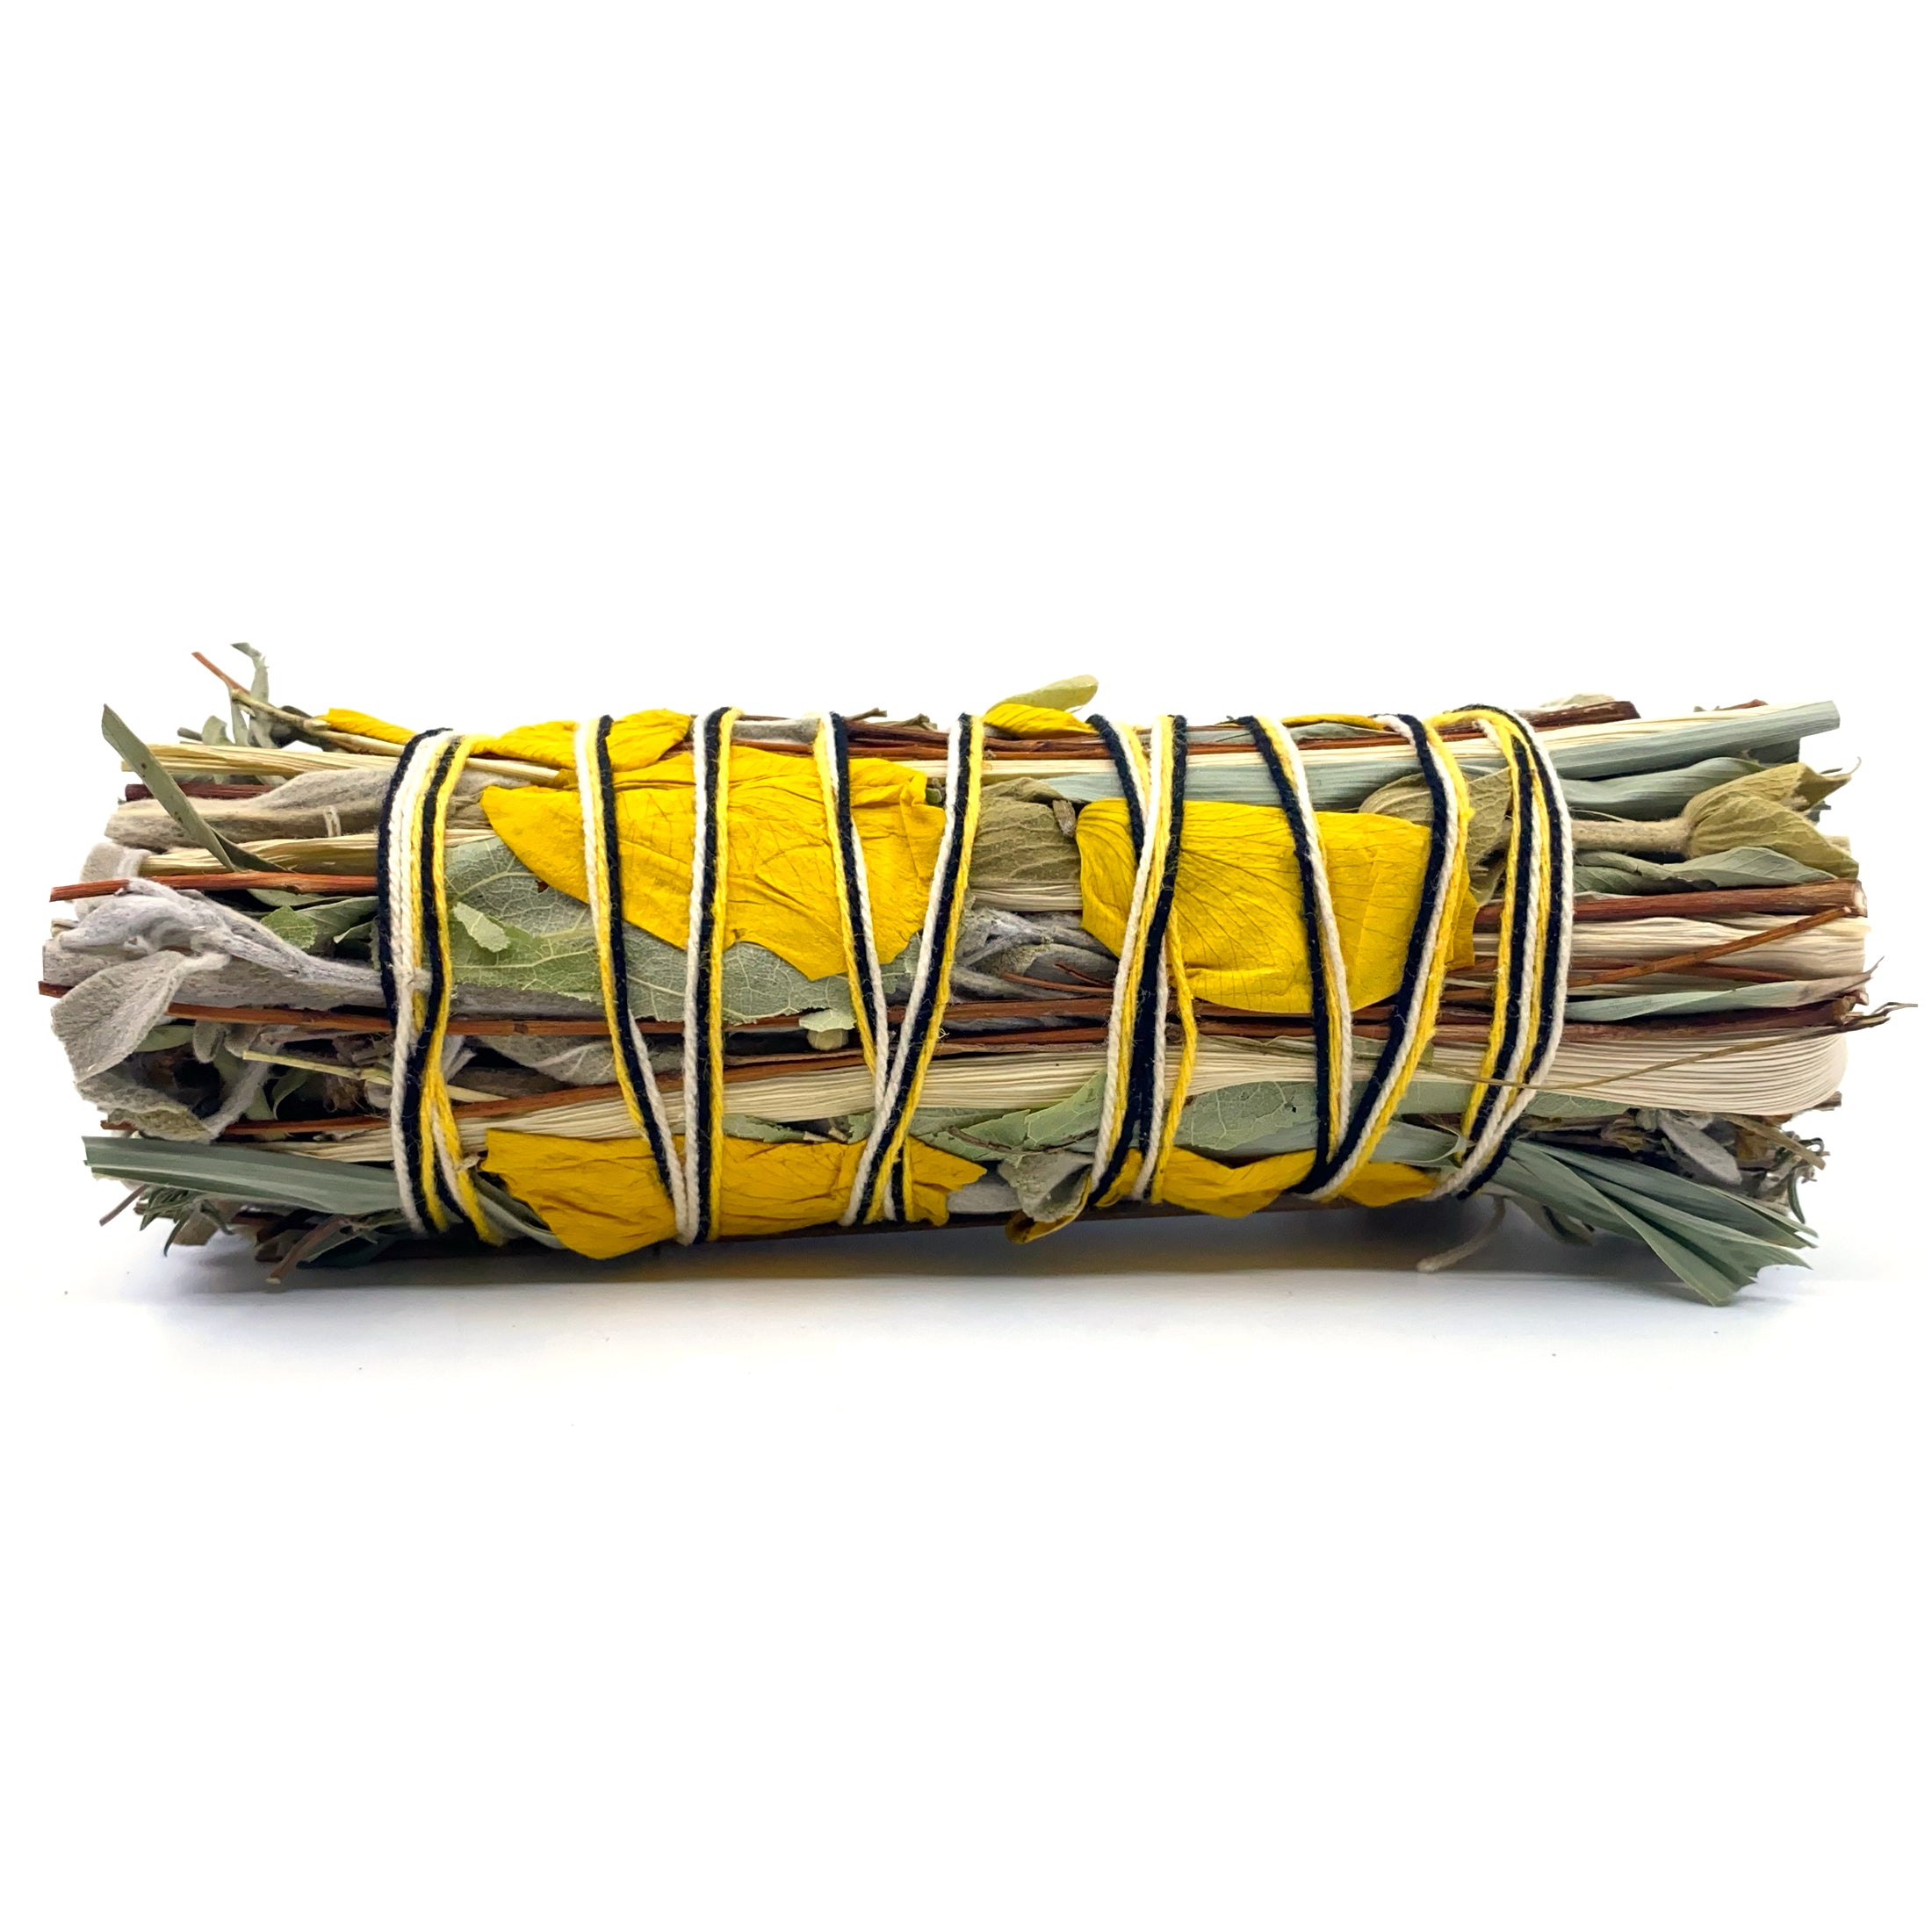 Healthy Boundaries - With Good Intentions Smudge Stick